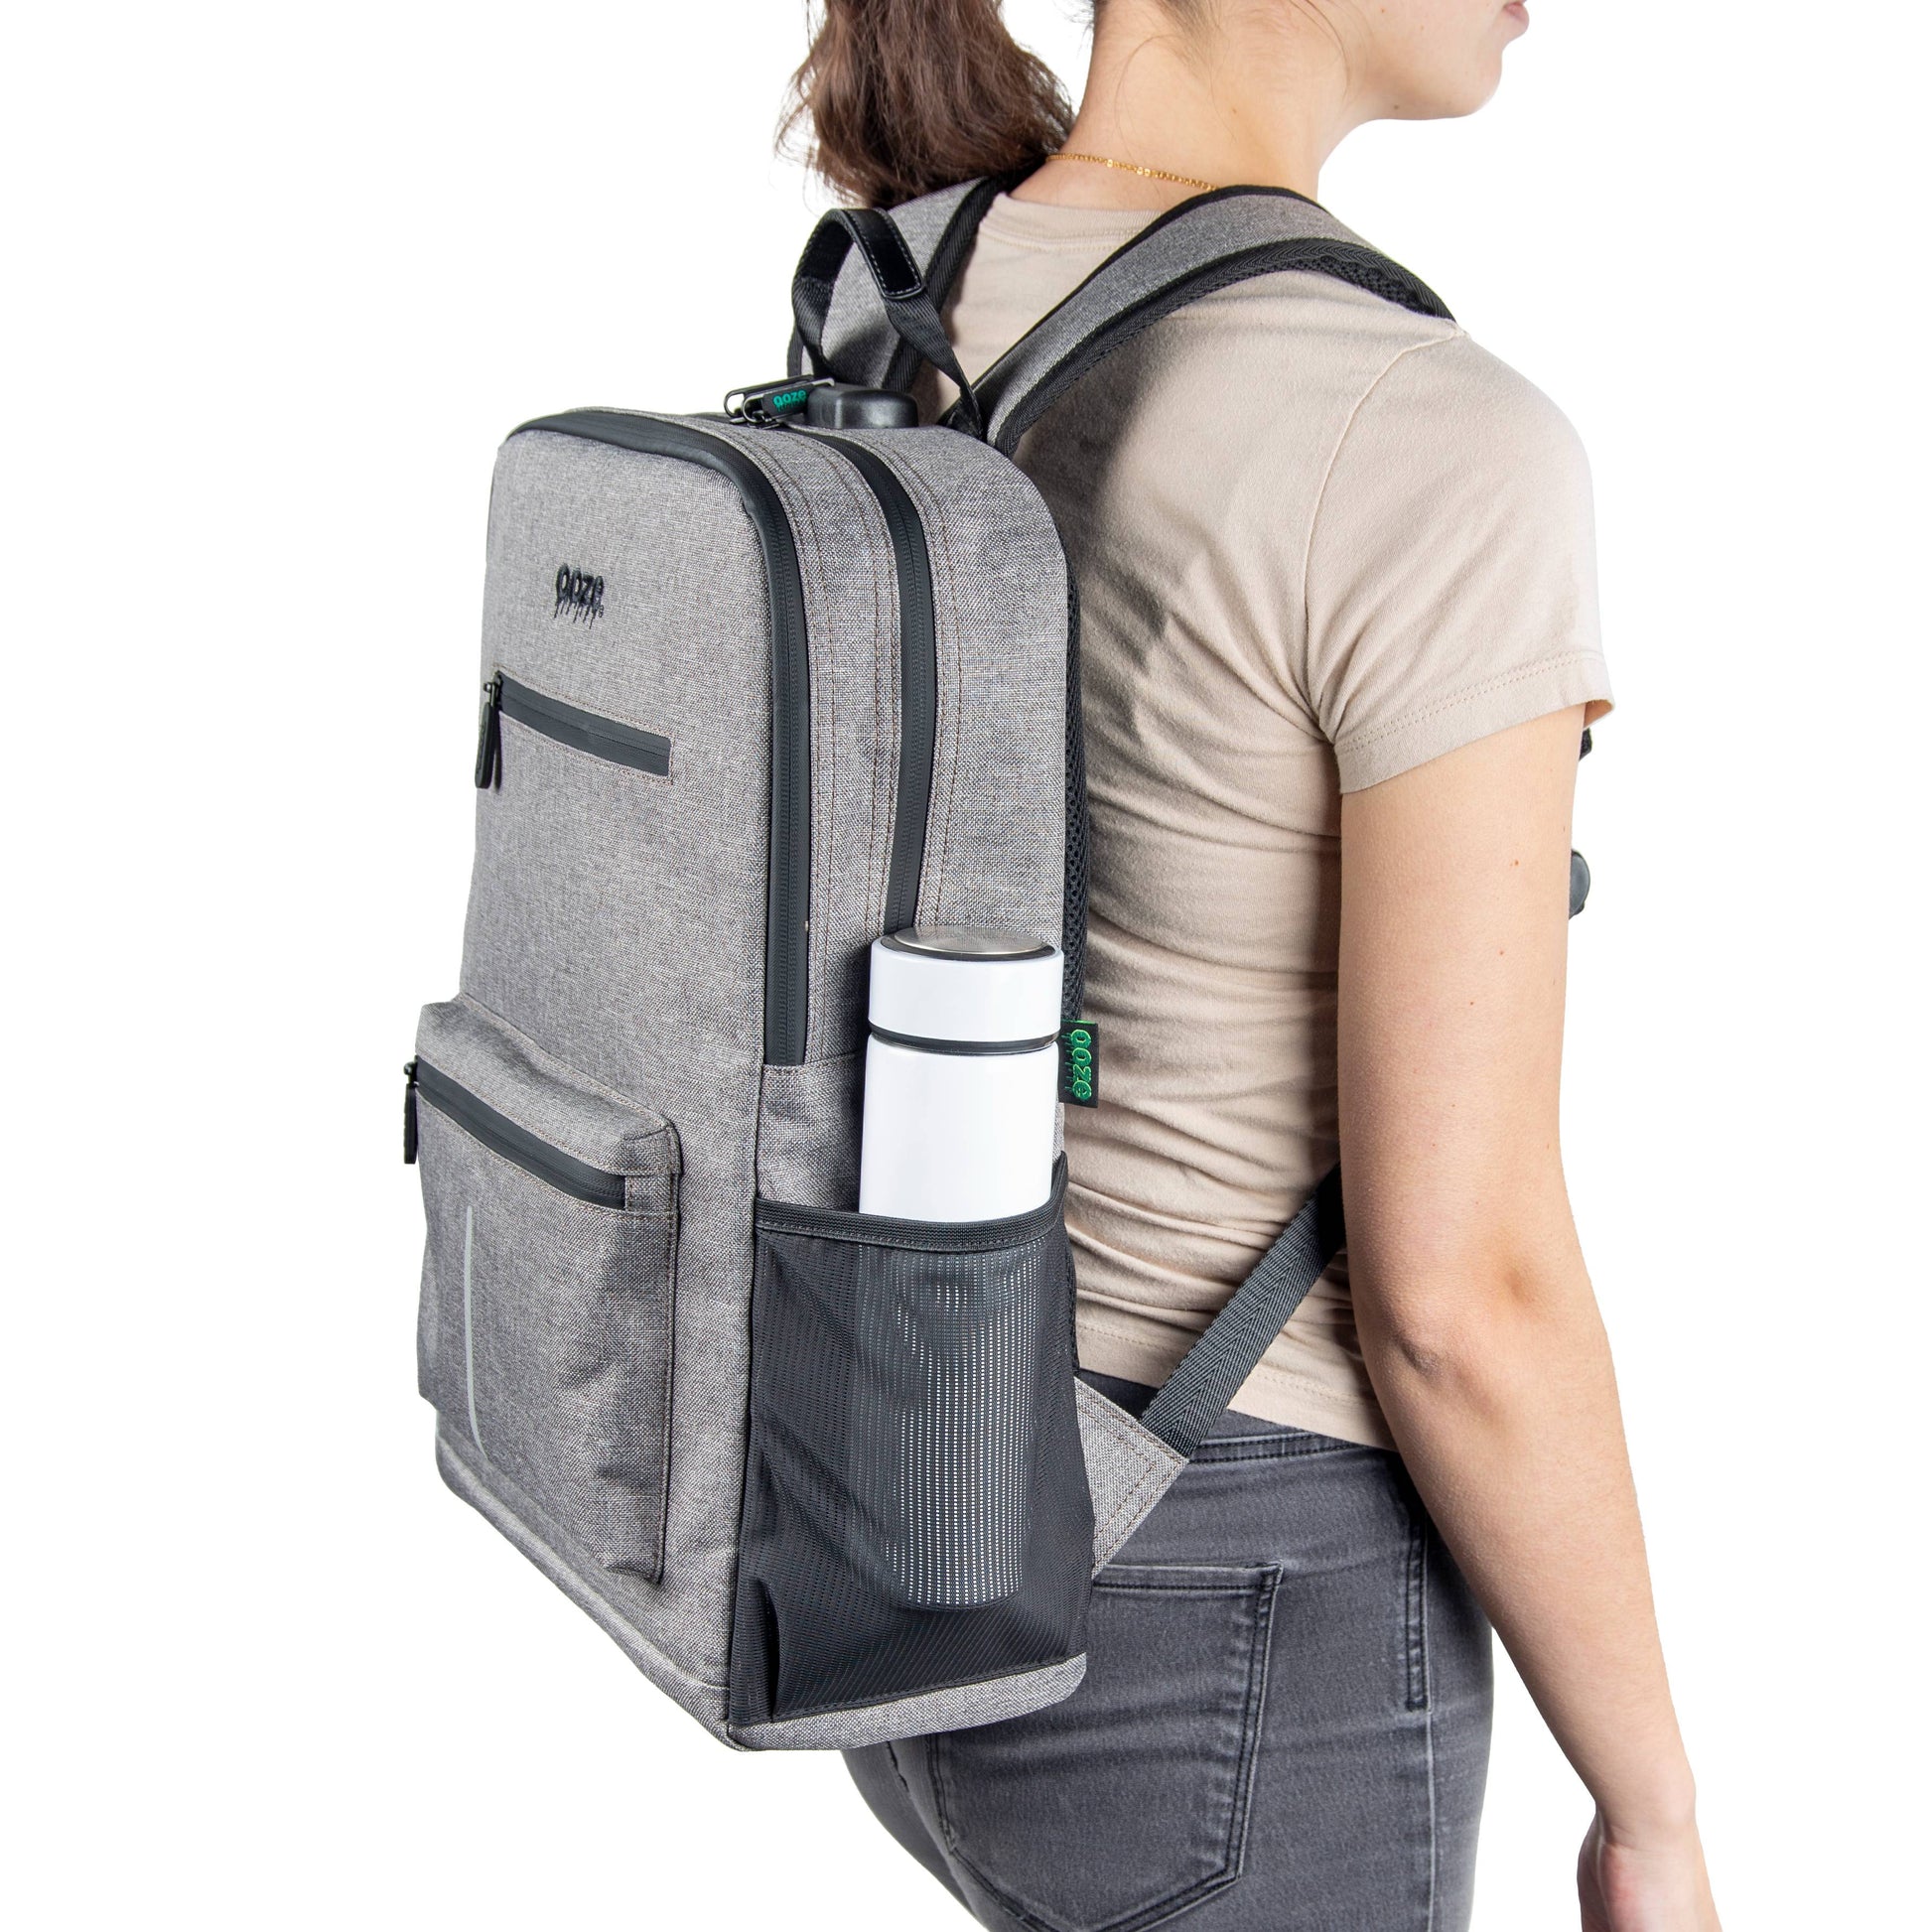 Gray Smell Proof Smoking Backpack with Lock